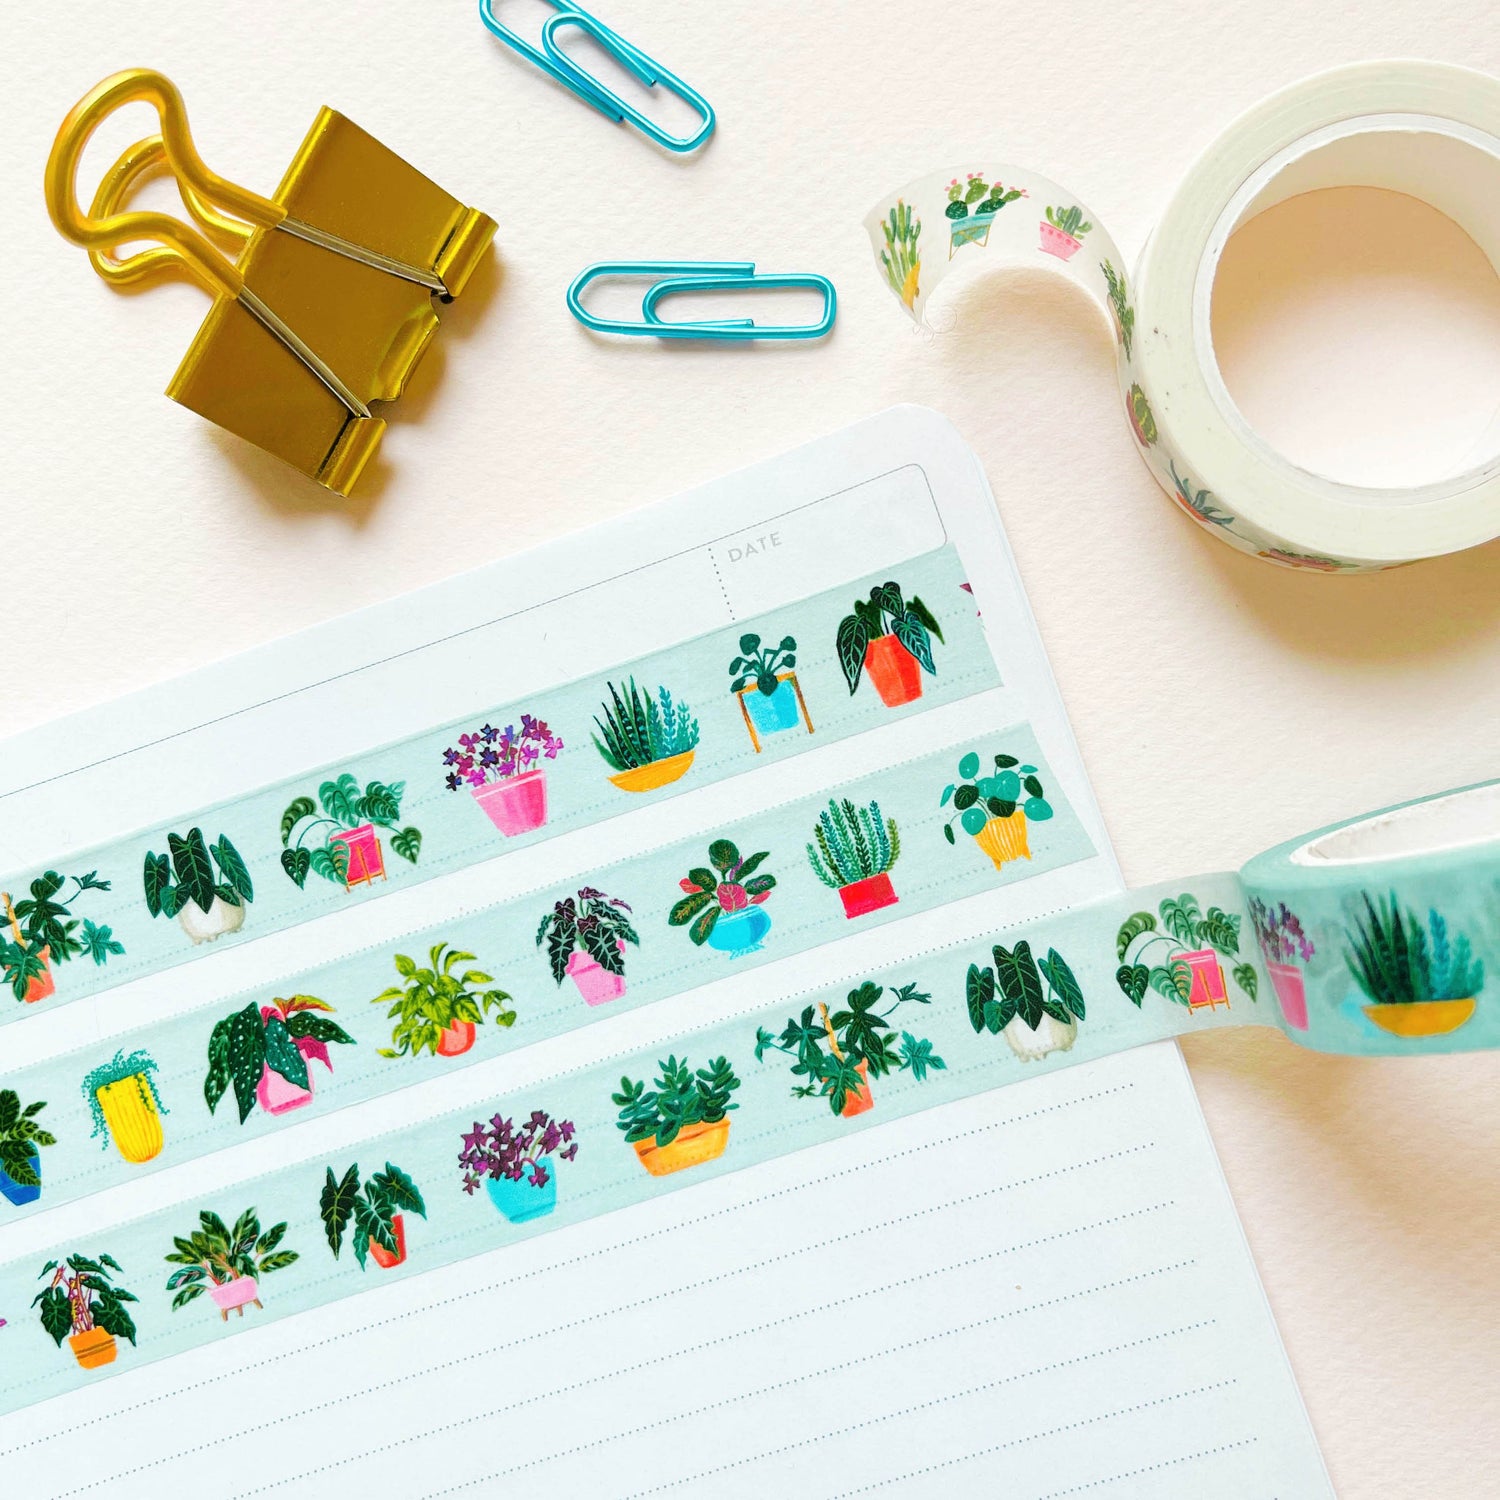 Houseplant Washi Tape with Cactus Washi Tape with paper clips and notebook